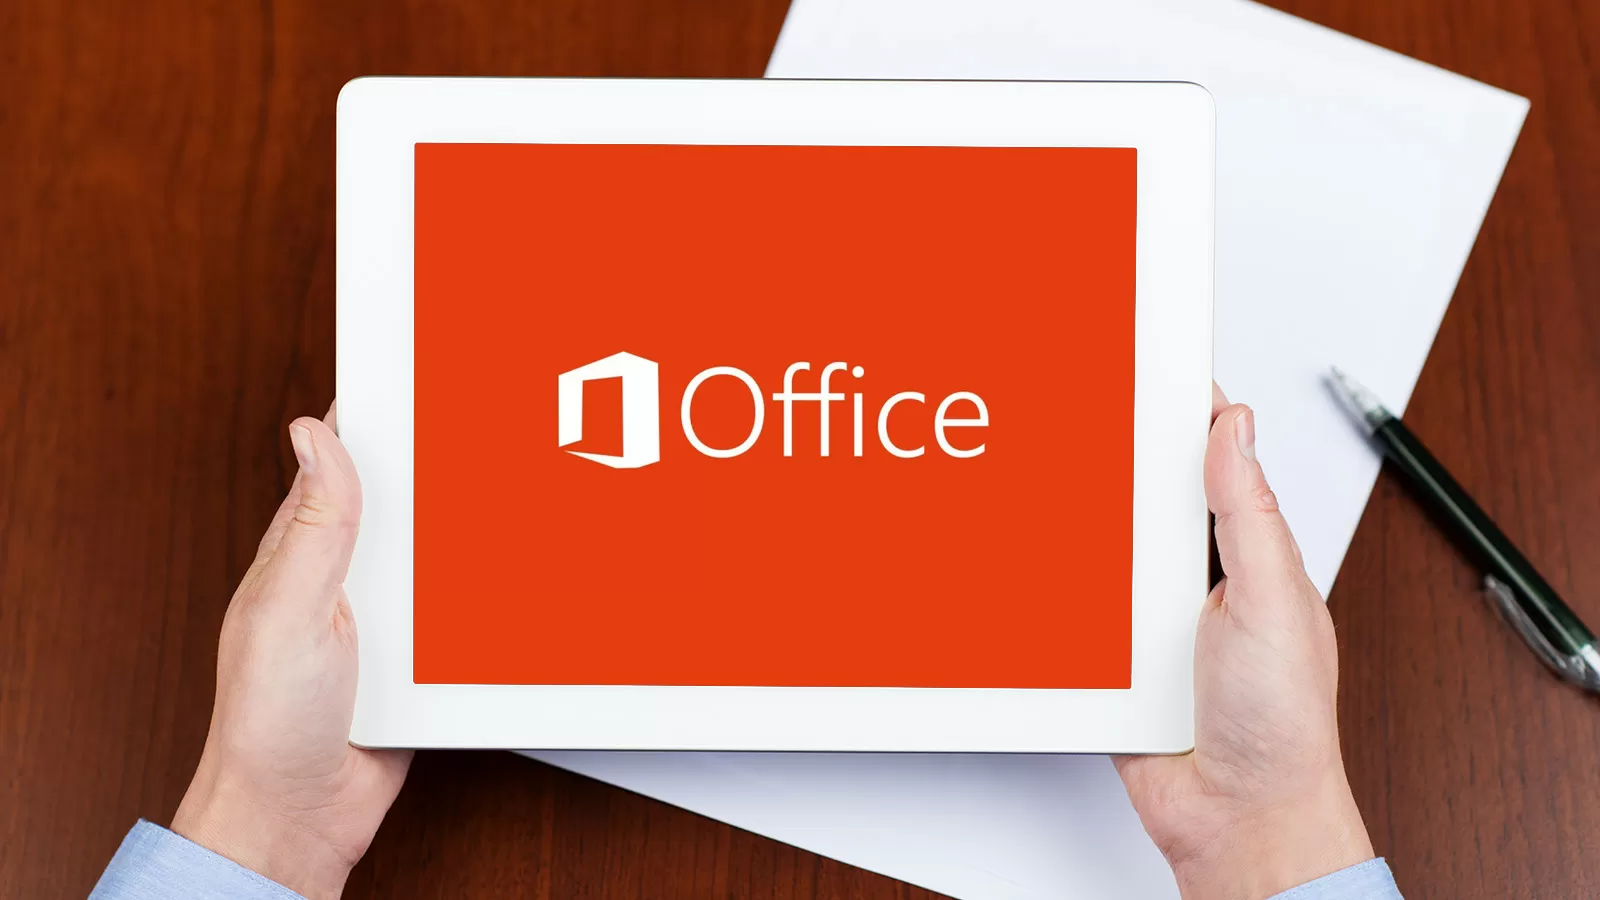 Microsoft announces Office 2019, coming next year